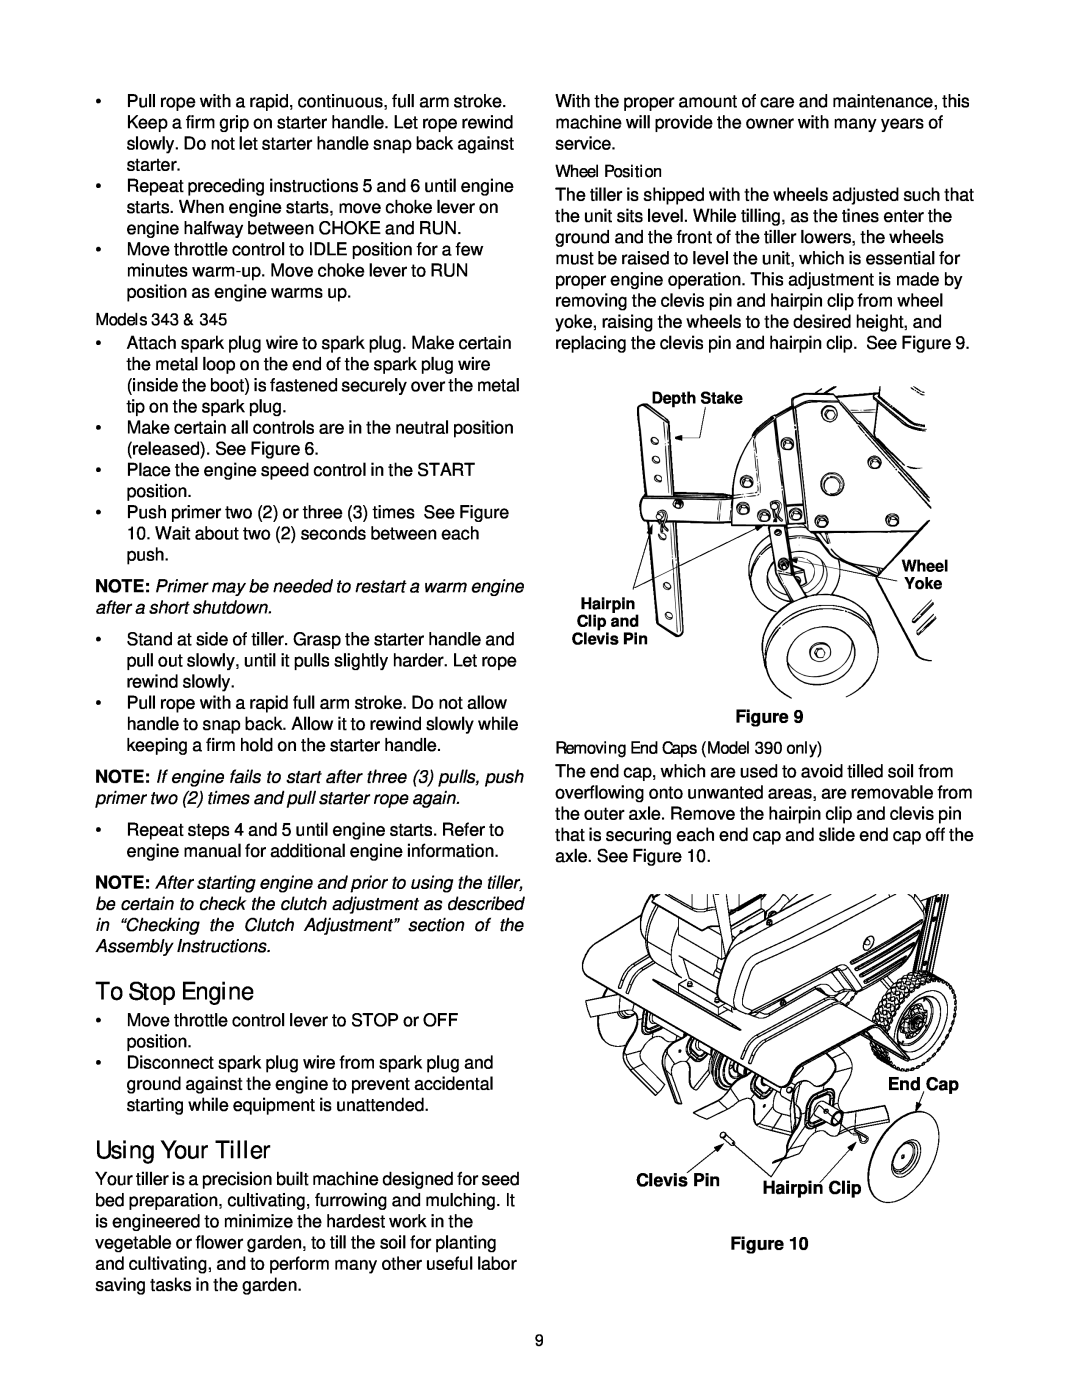 MTD 390 Shown To Stop Engine, Using Your Tiller, Models, Wheel Position, Removing End Caps Model 390 only, Clevis Pin 